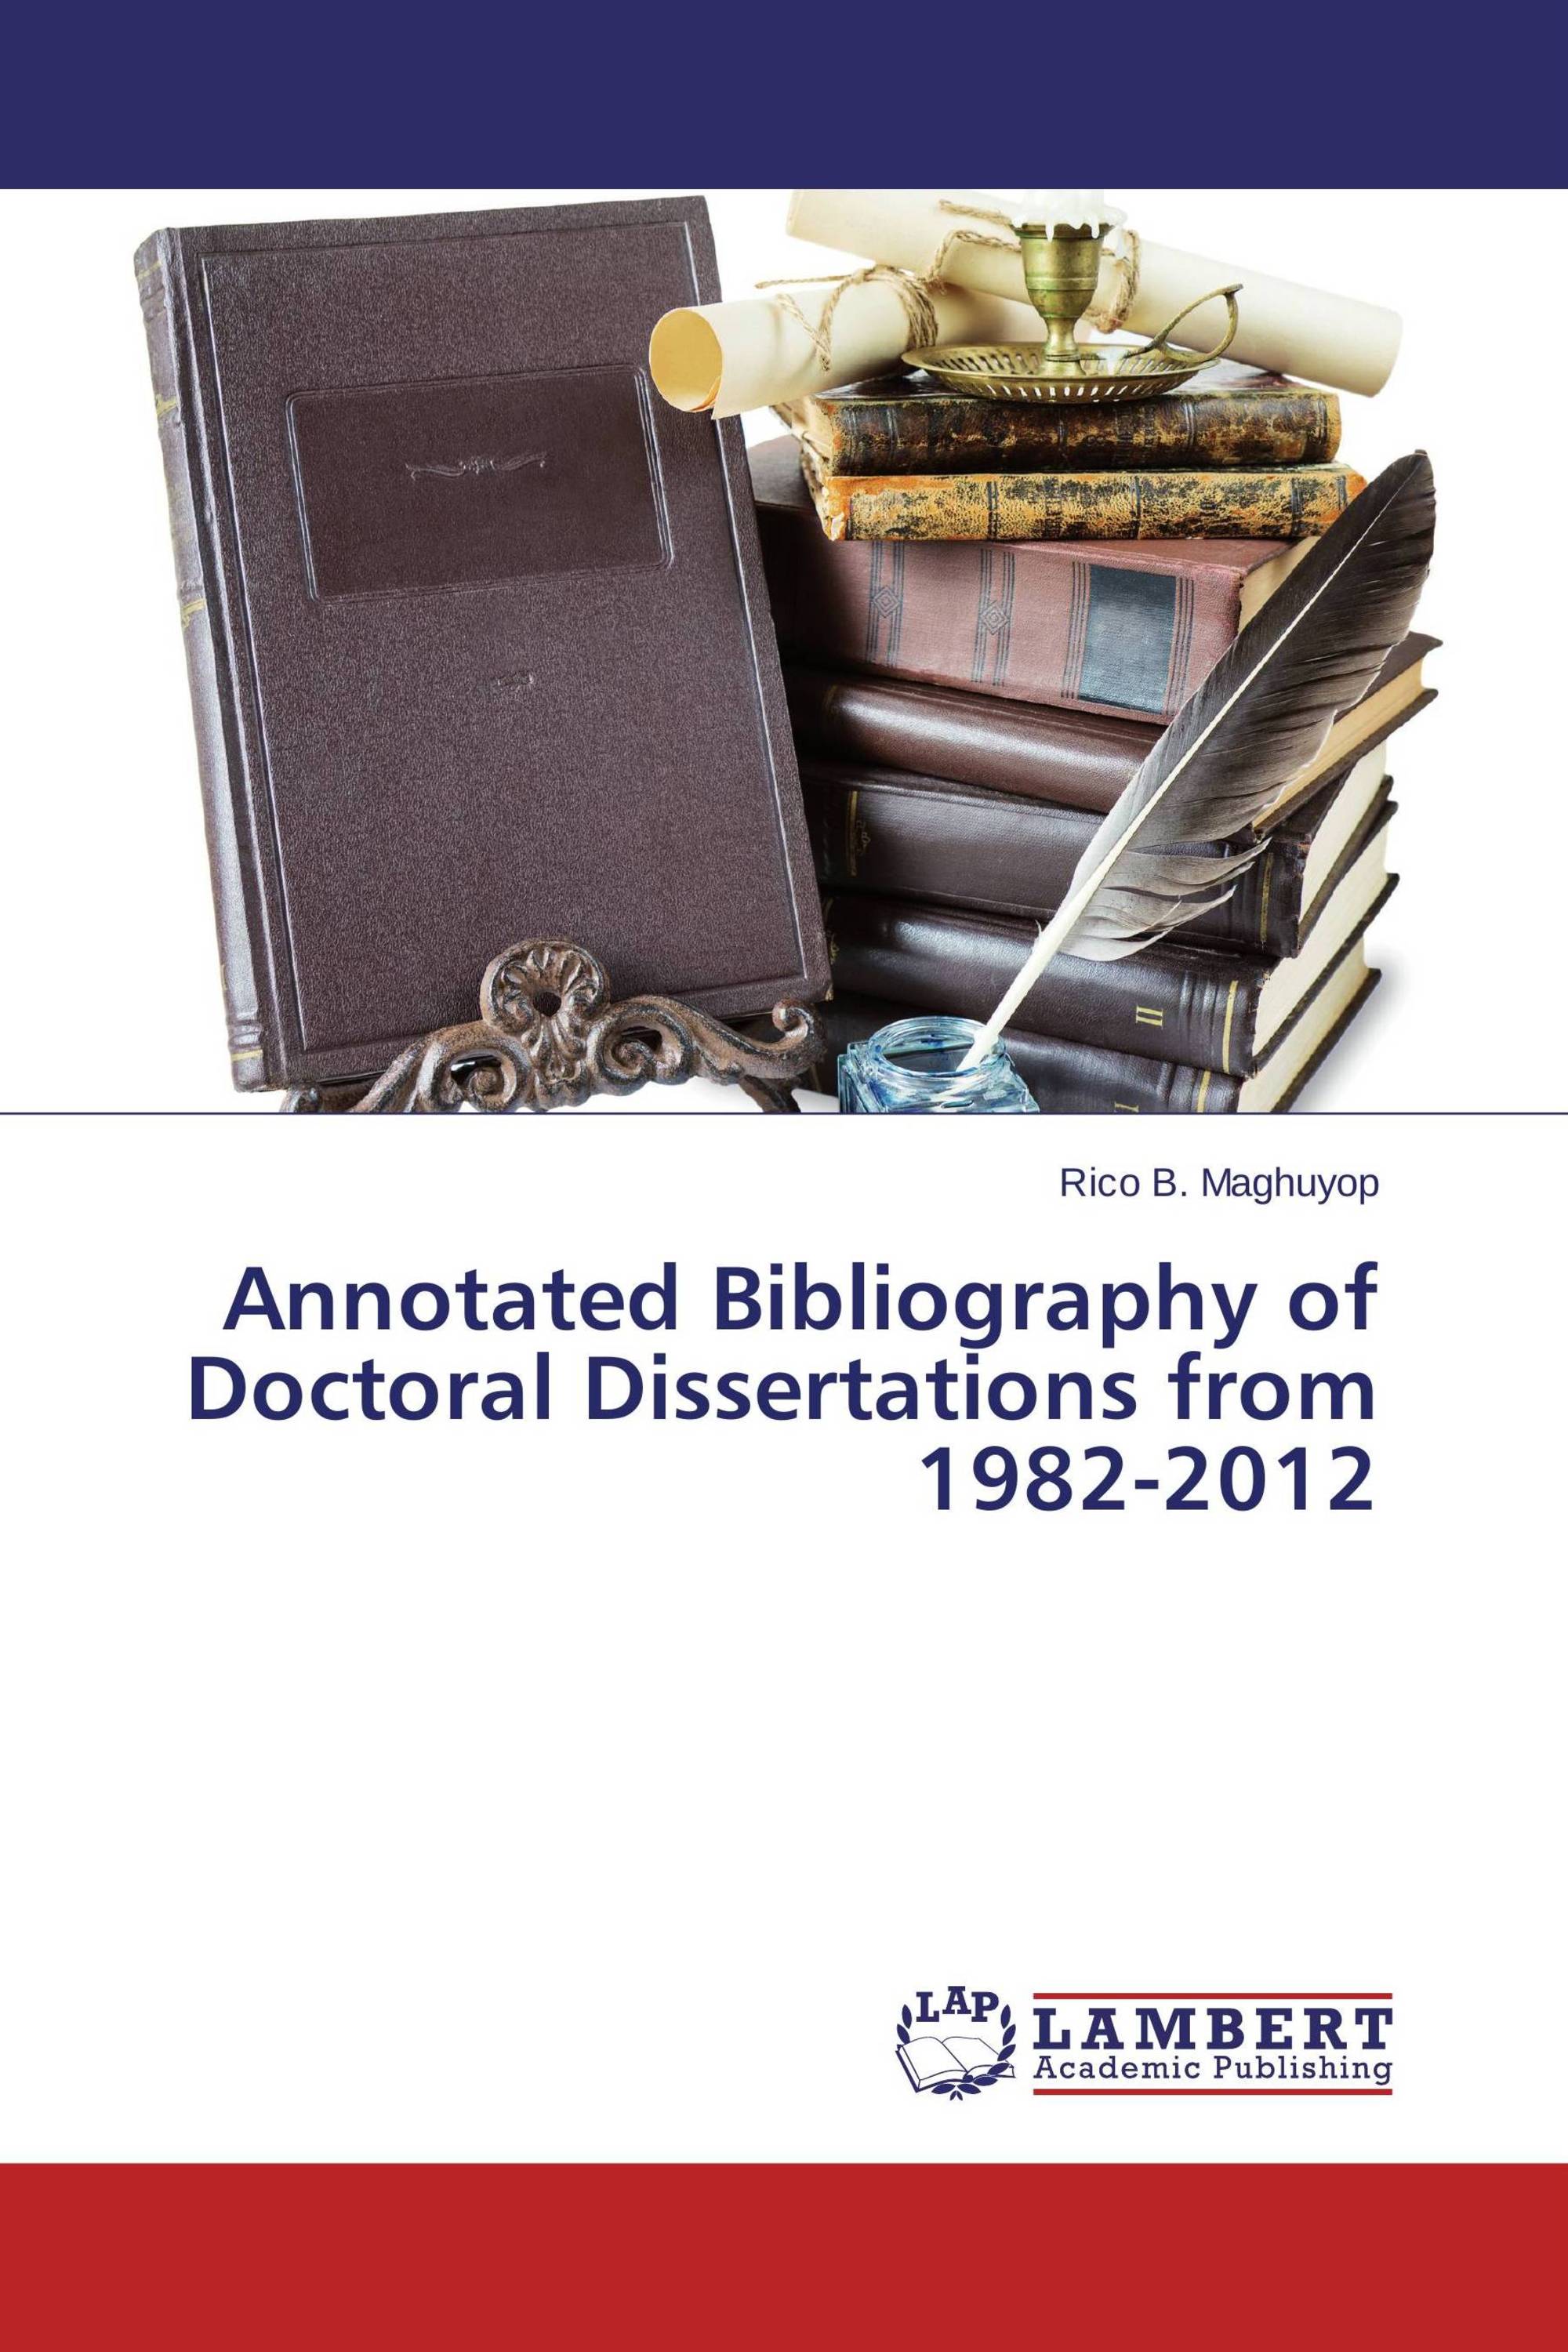 phd thesis bibliography